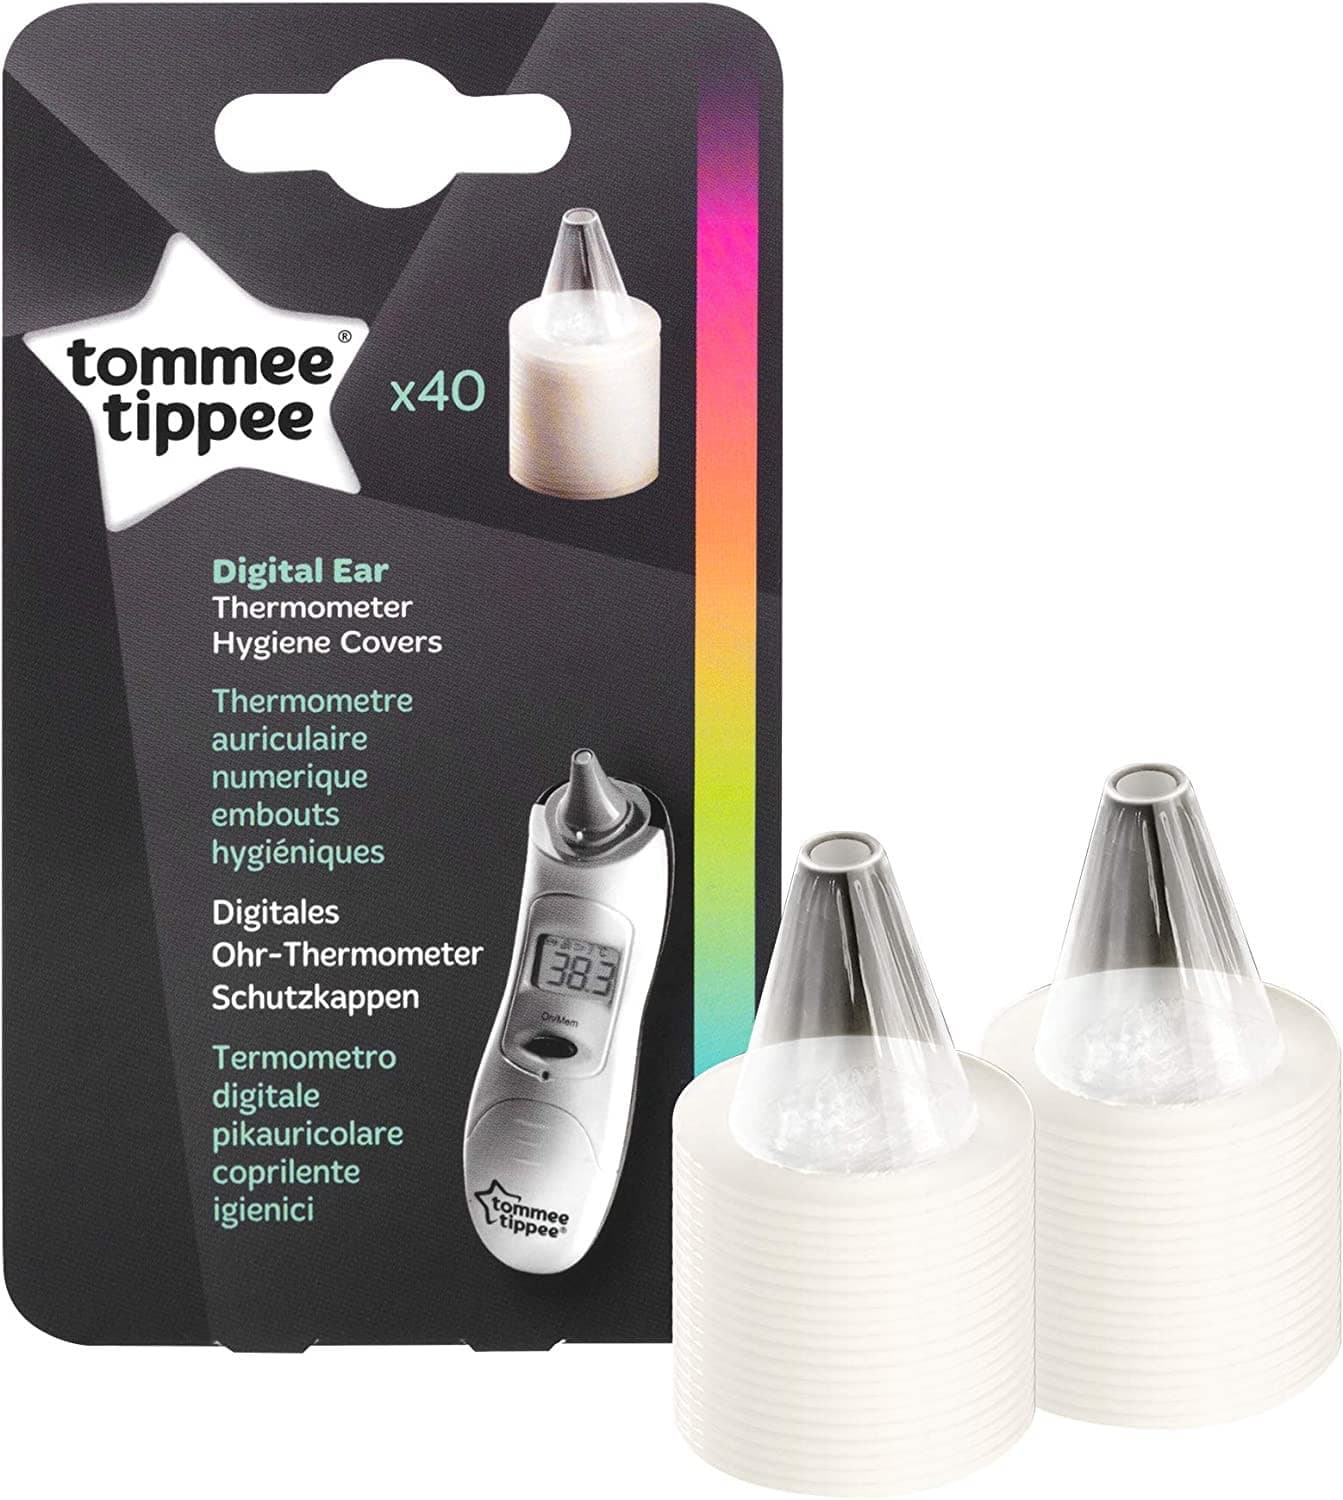 Tommee Tippee Digital Ear Thermometer Hygiene Covers (40 refills).